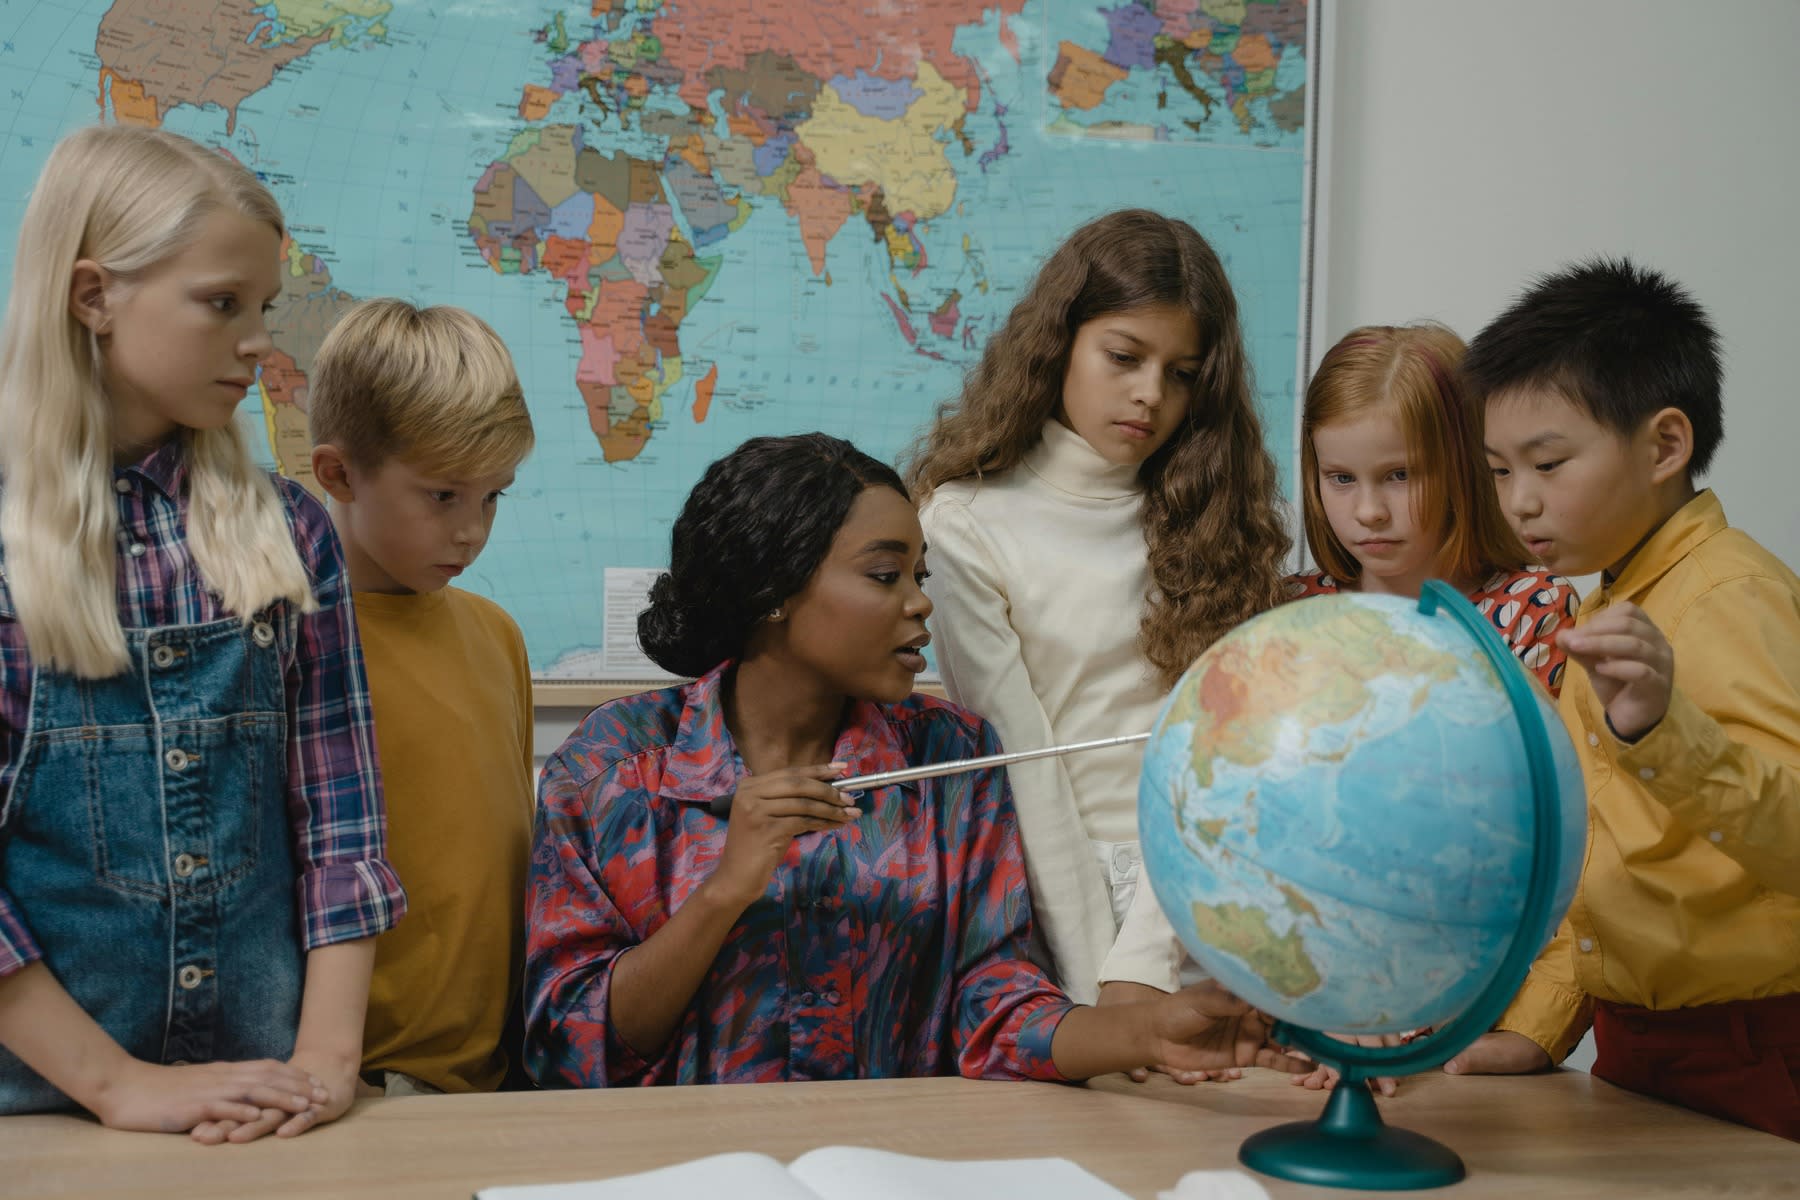 Female teacher pointing at a globe in her desk while her young students looks on